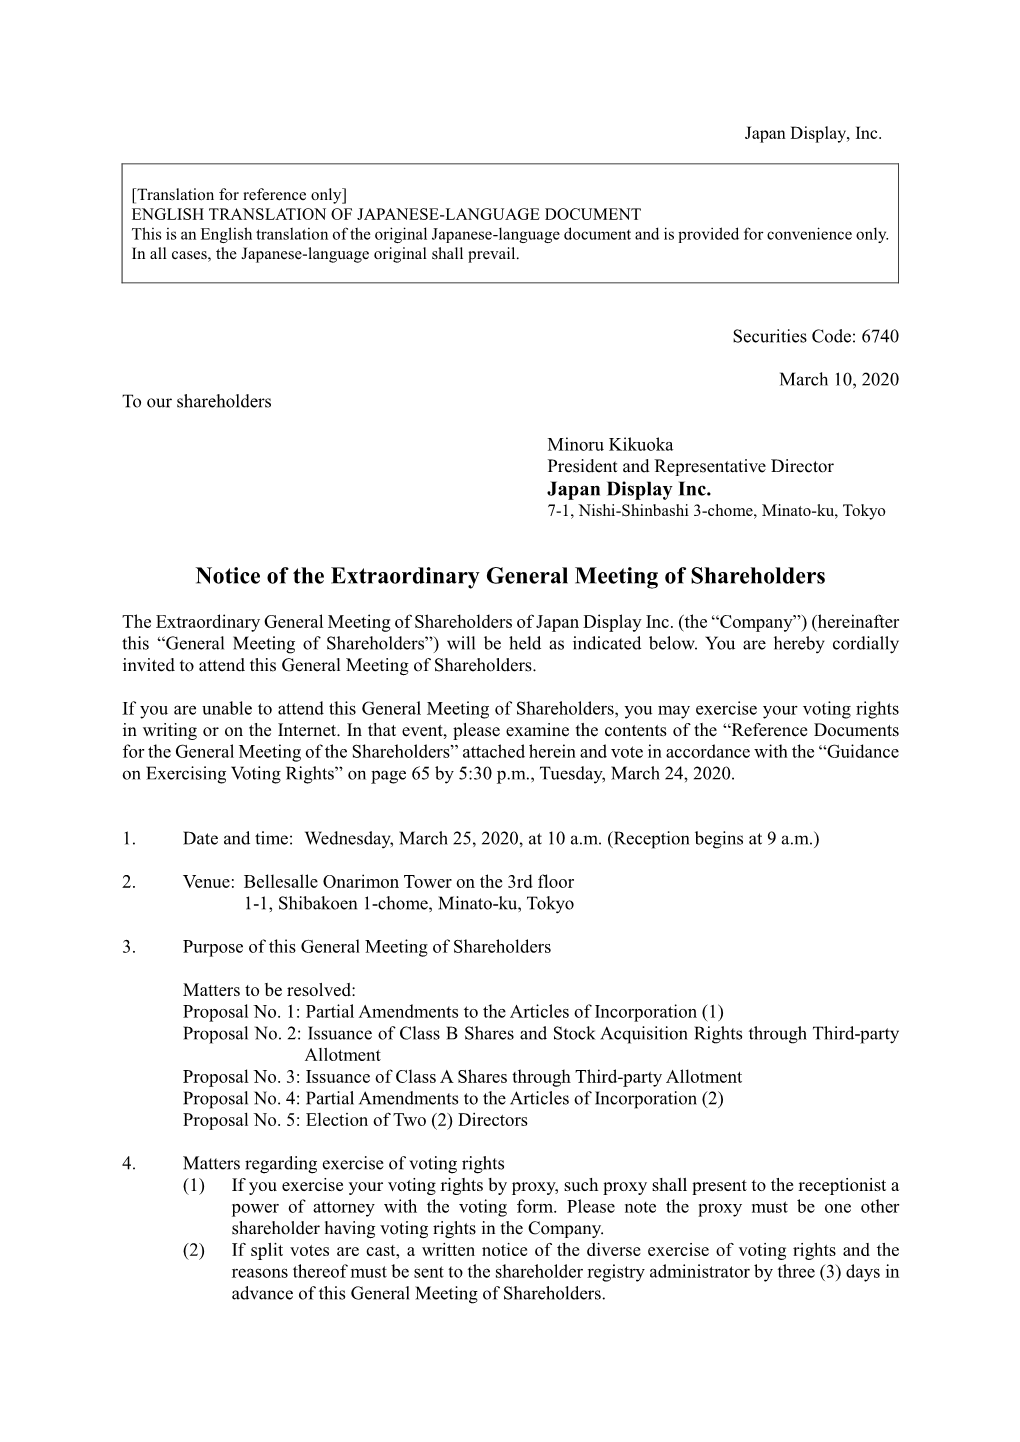 Notice of the Extraordinary General Meeting of Shareholders